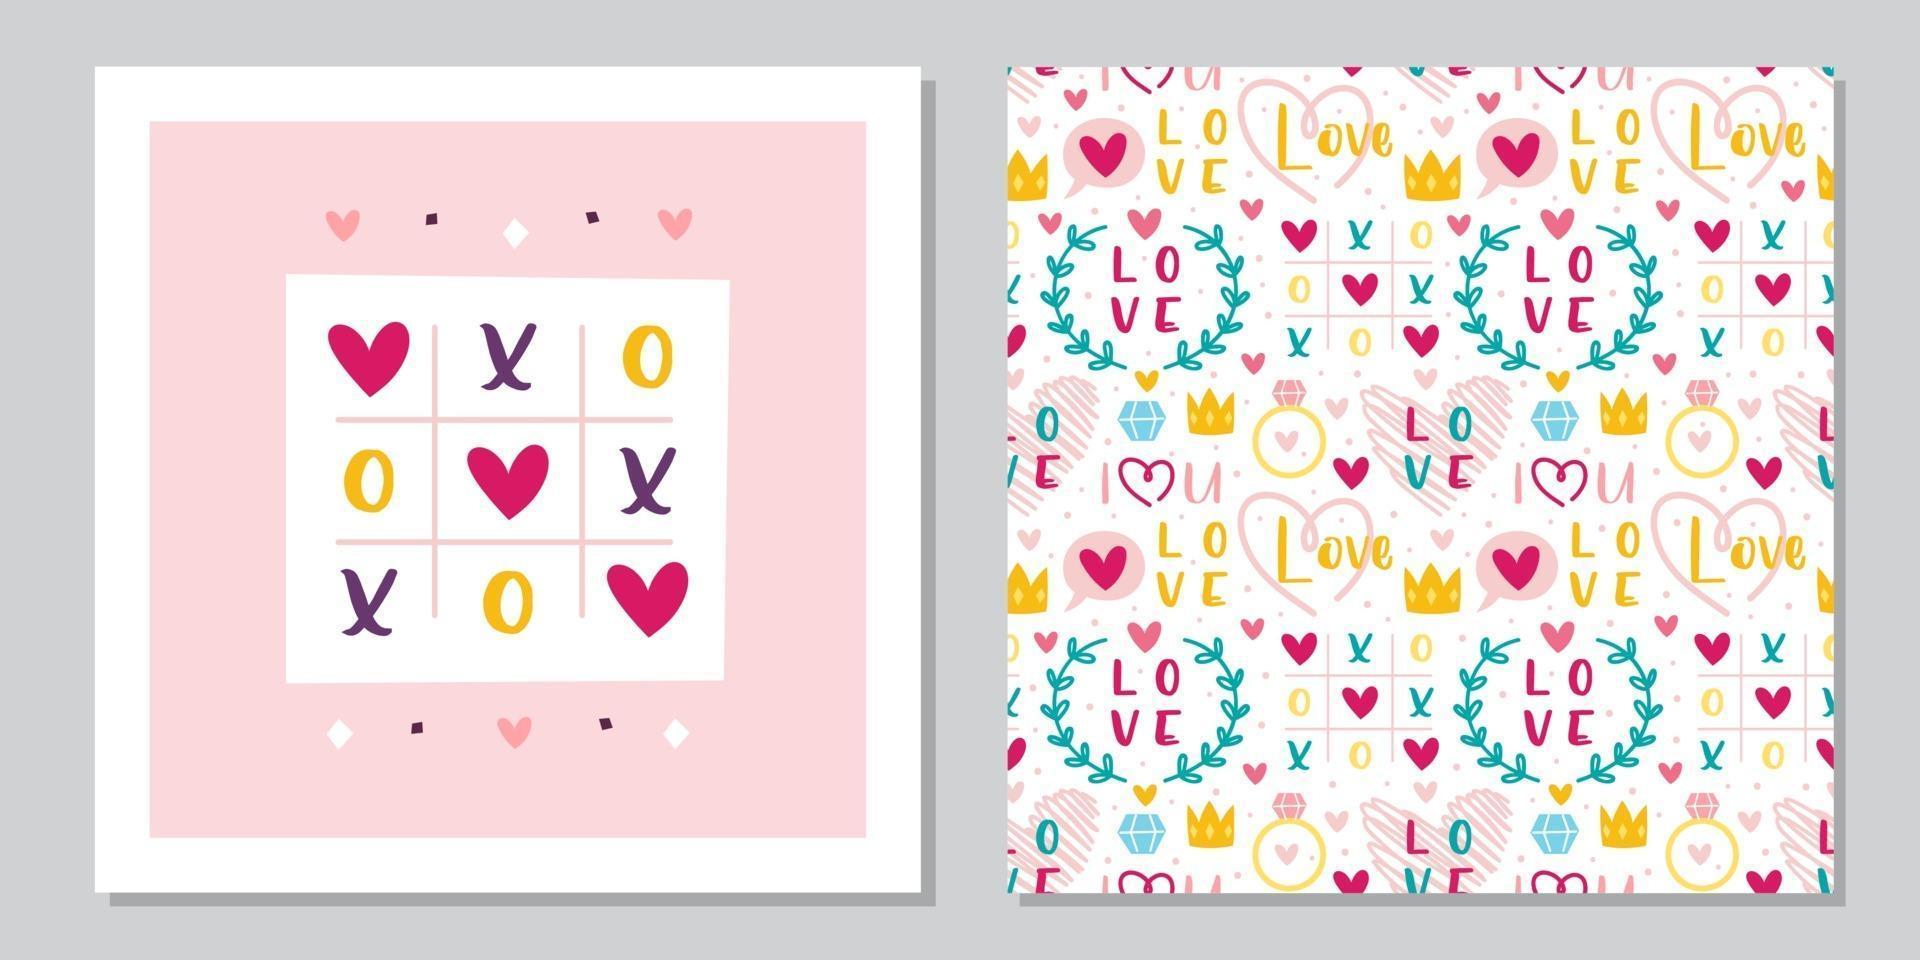 St Valentine's Day greeting card template design. Love, heart, ring, crown, tic tac toe. Relationship, emotion, passion. Seamless pattern, texture, background. vector